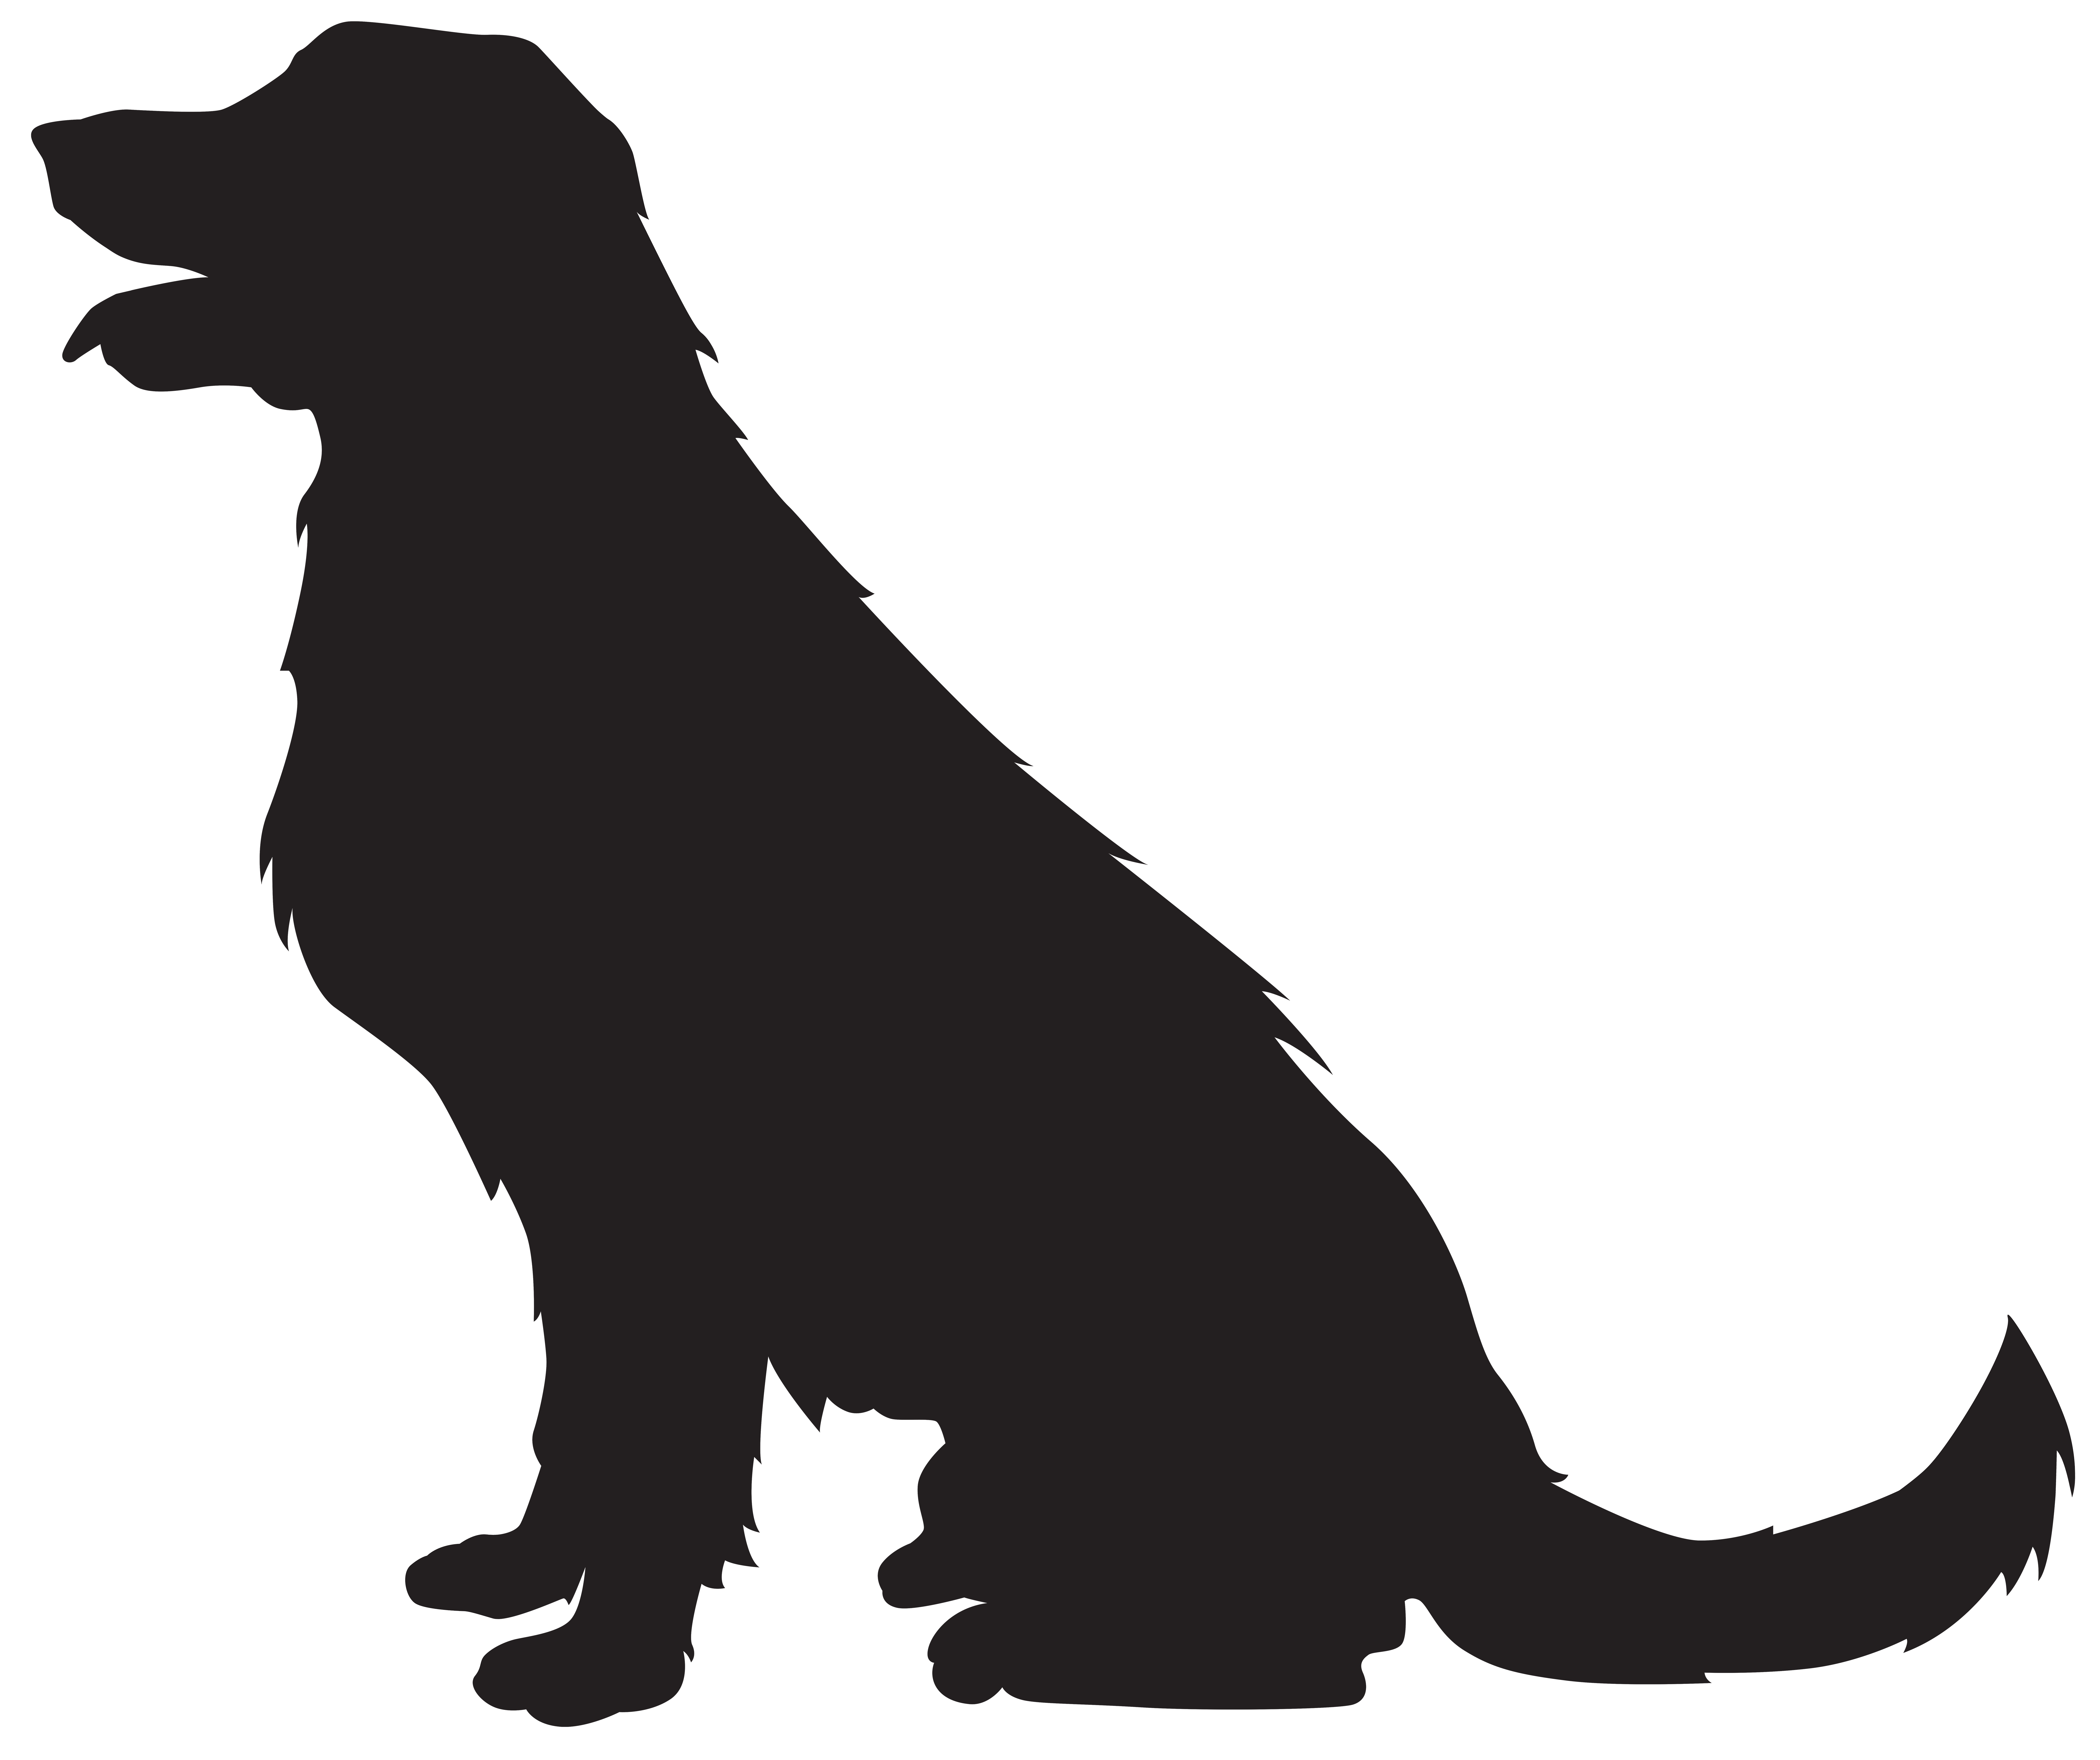 dog and cat silhouette png